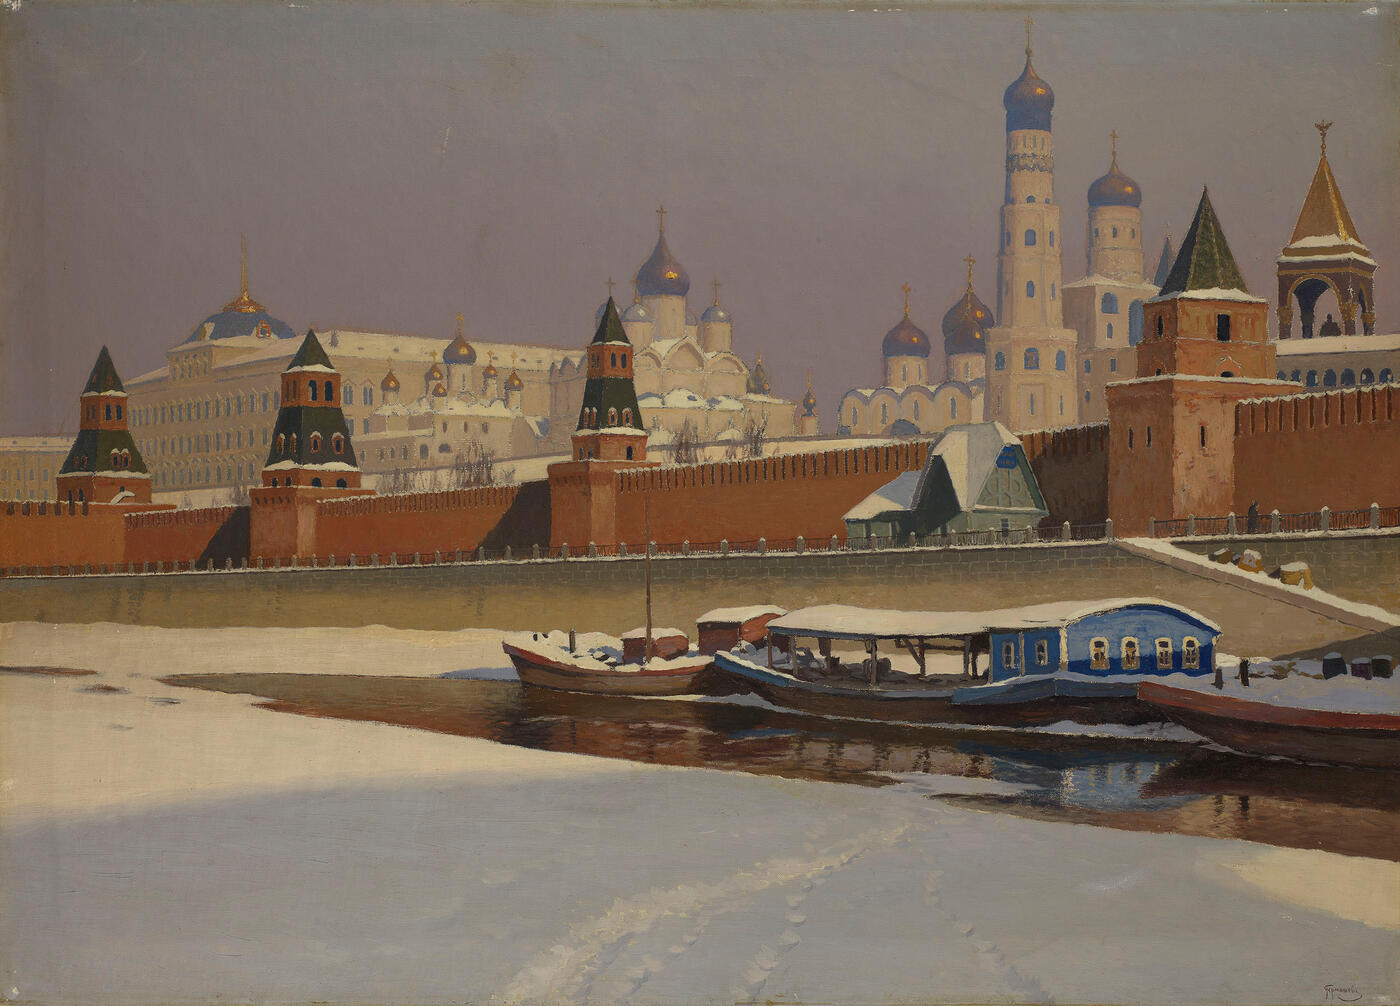 The Moscow Kremlin in Winter